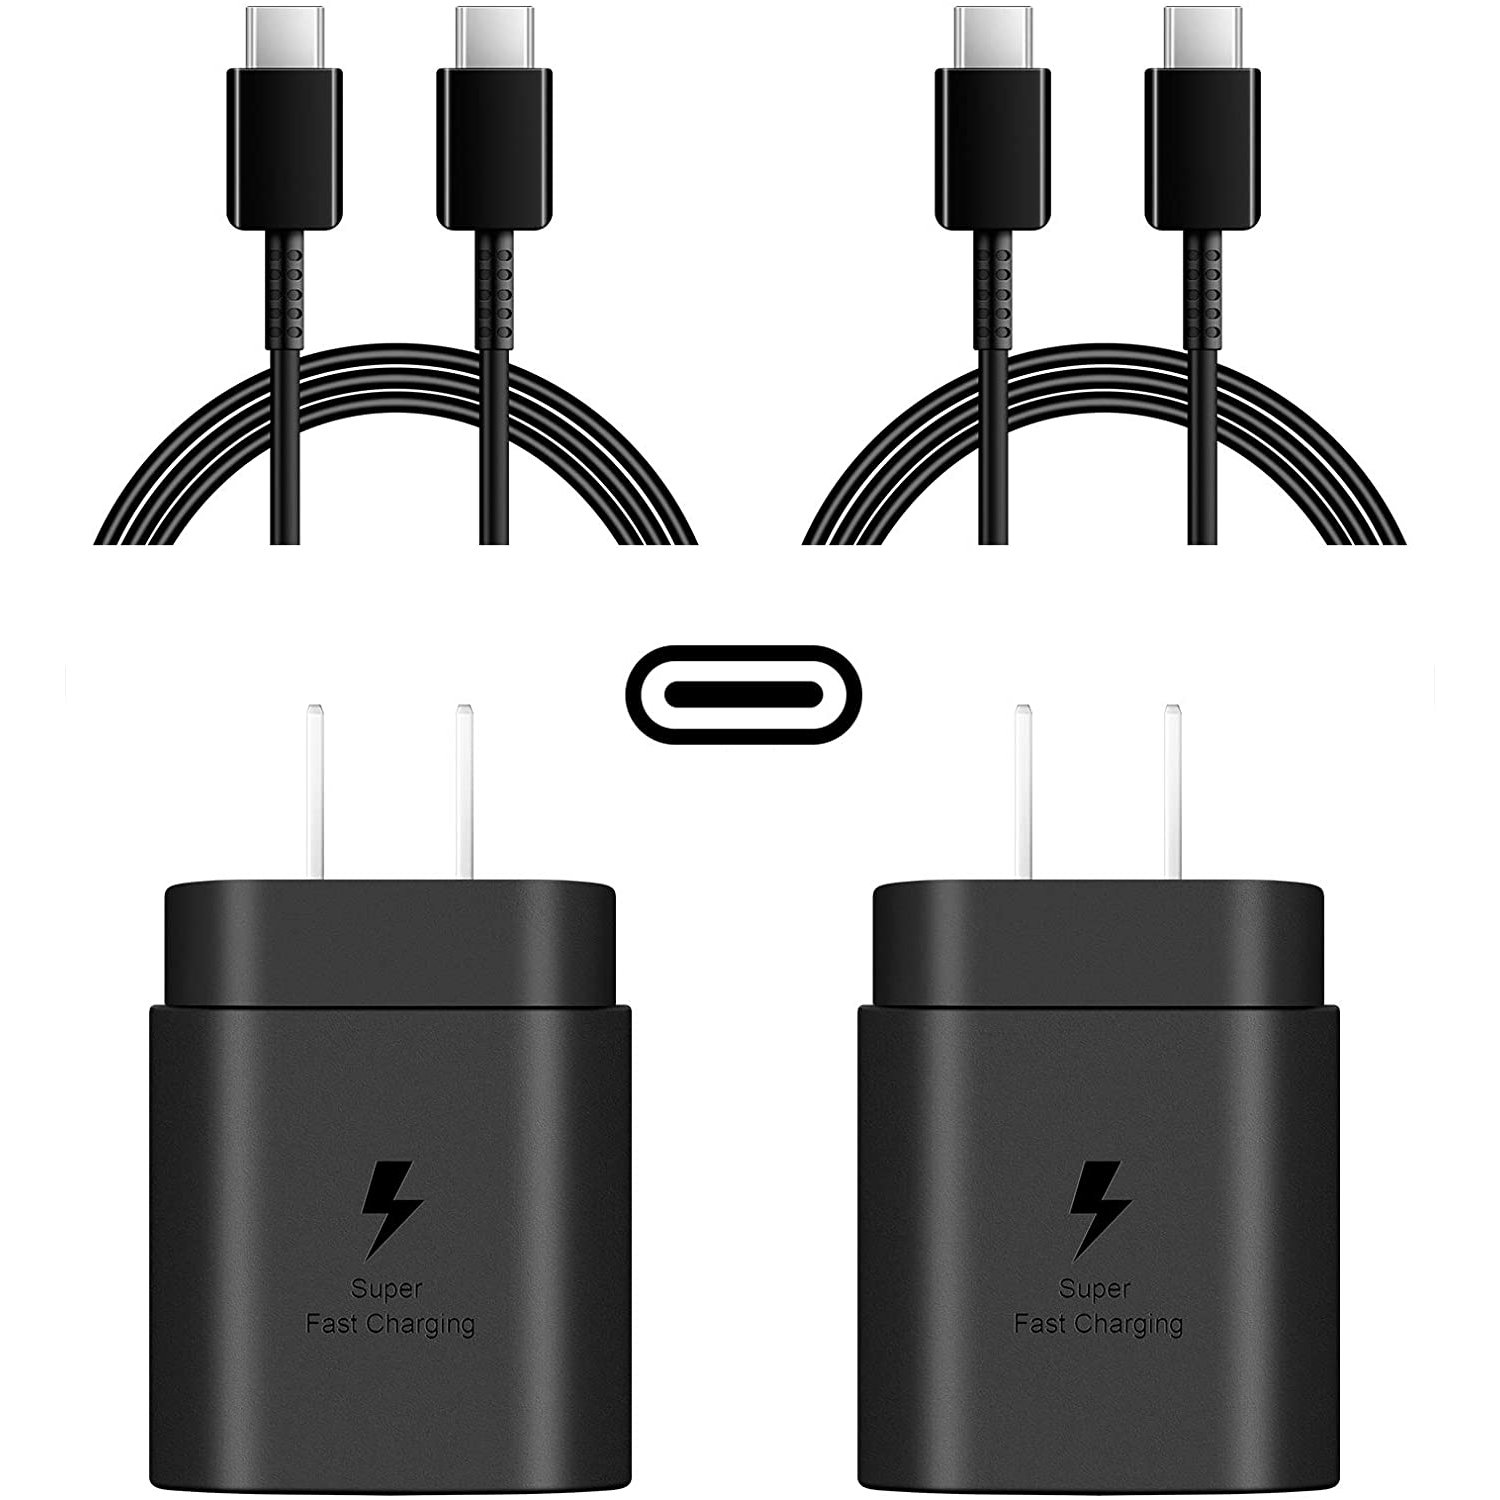 (CABLESHARK) (2PACK) Samsung Compatible USB-C Super Fast Charging Wall Charger-25W PD and Type-C Cable(6ft) with OTG Type C Adapter for Galaxy S21/S21+/S21 Ultra/S20/S20+/S20 Ultra/Note 20/Note 20 Ul